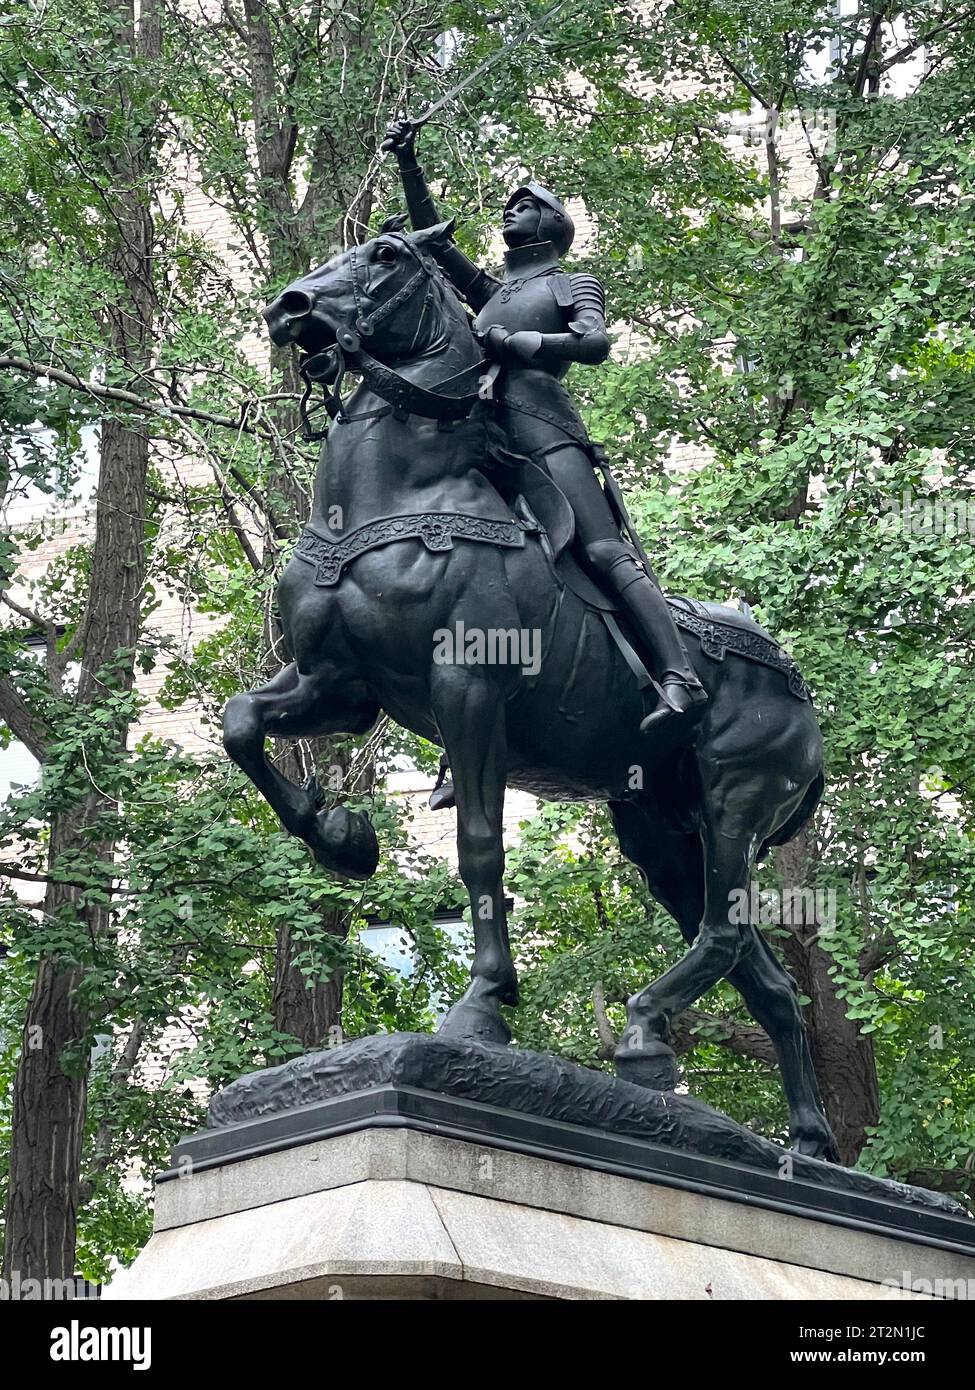 Statue of Joan of Arc erected in 1915 by the Joan of Arc Statue Committee in Joan of Arc Park at Riverside Drive and 93rd Street on the Upper West Side of Manhattan, NY City. Stock Photo